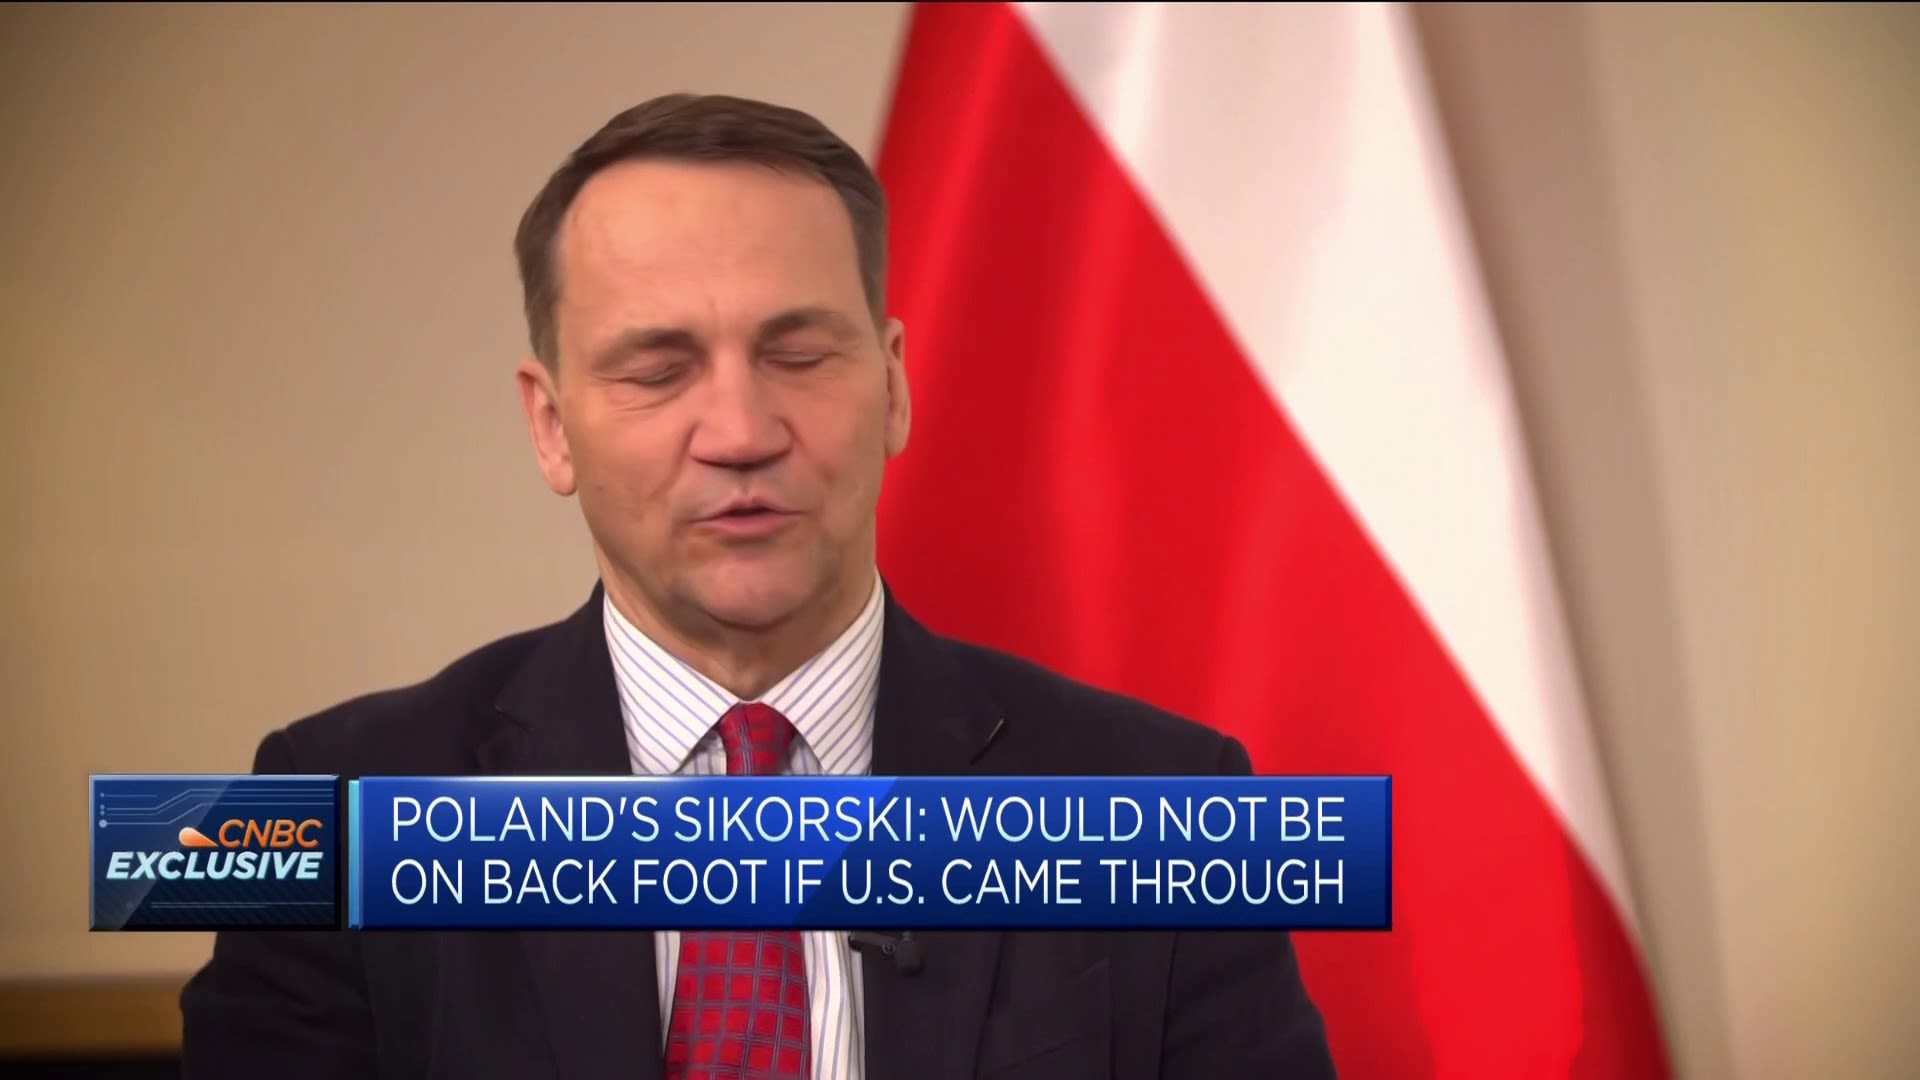 Success in Ukraine is now a matter of U.S. credibility, Polish foreign minister says